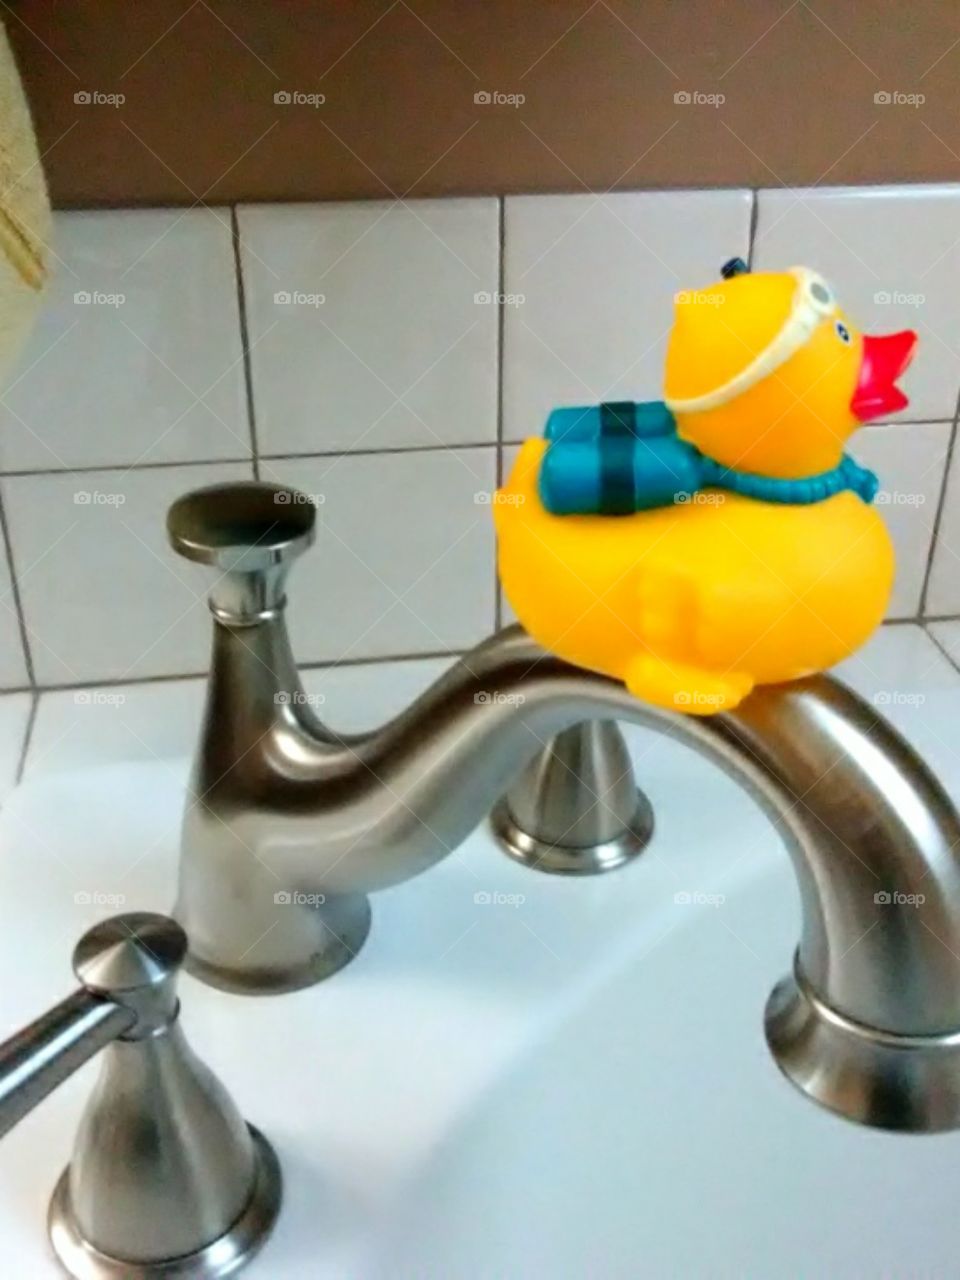 Rubber Ducky on Tub Faucet